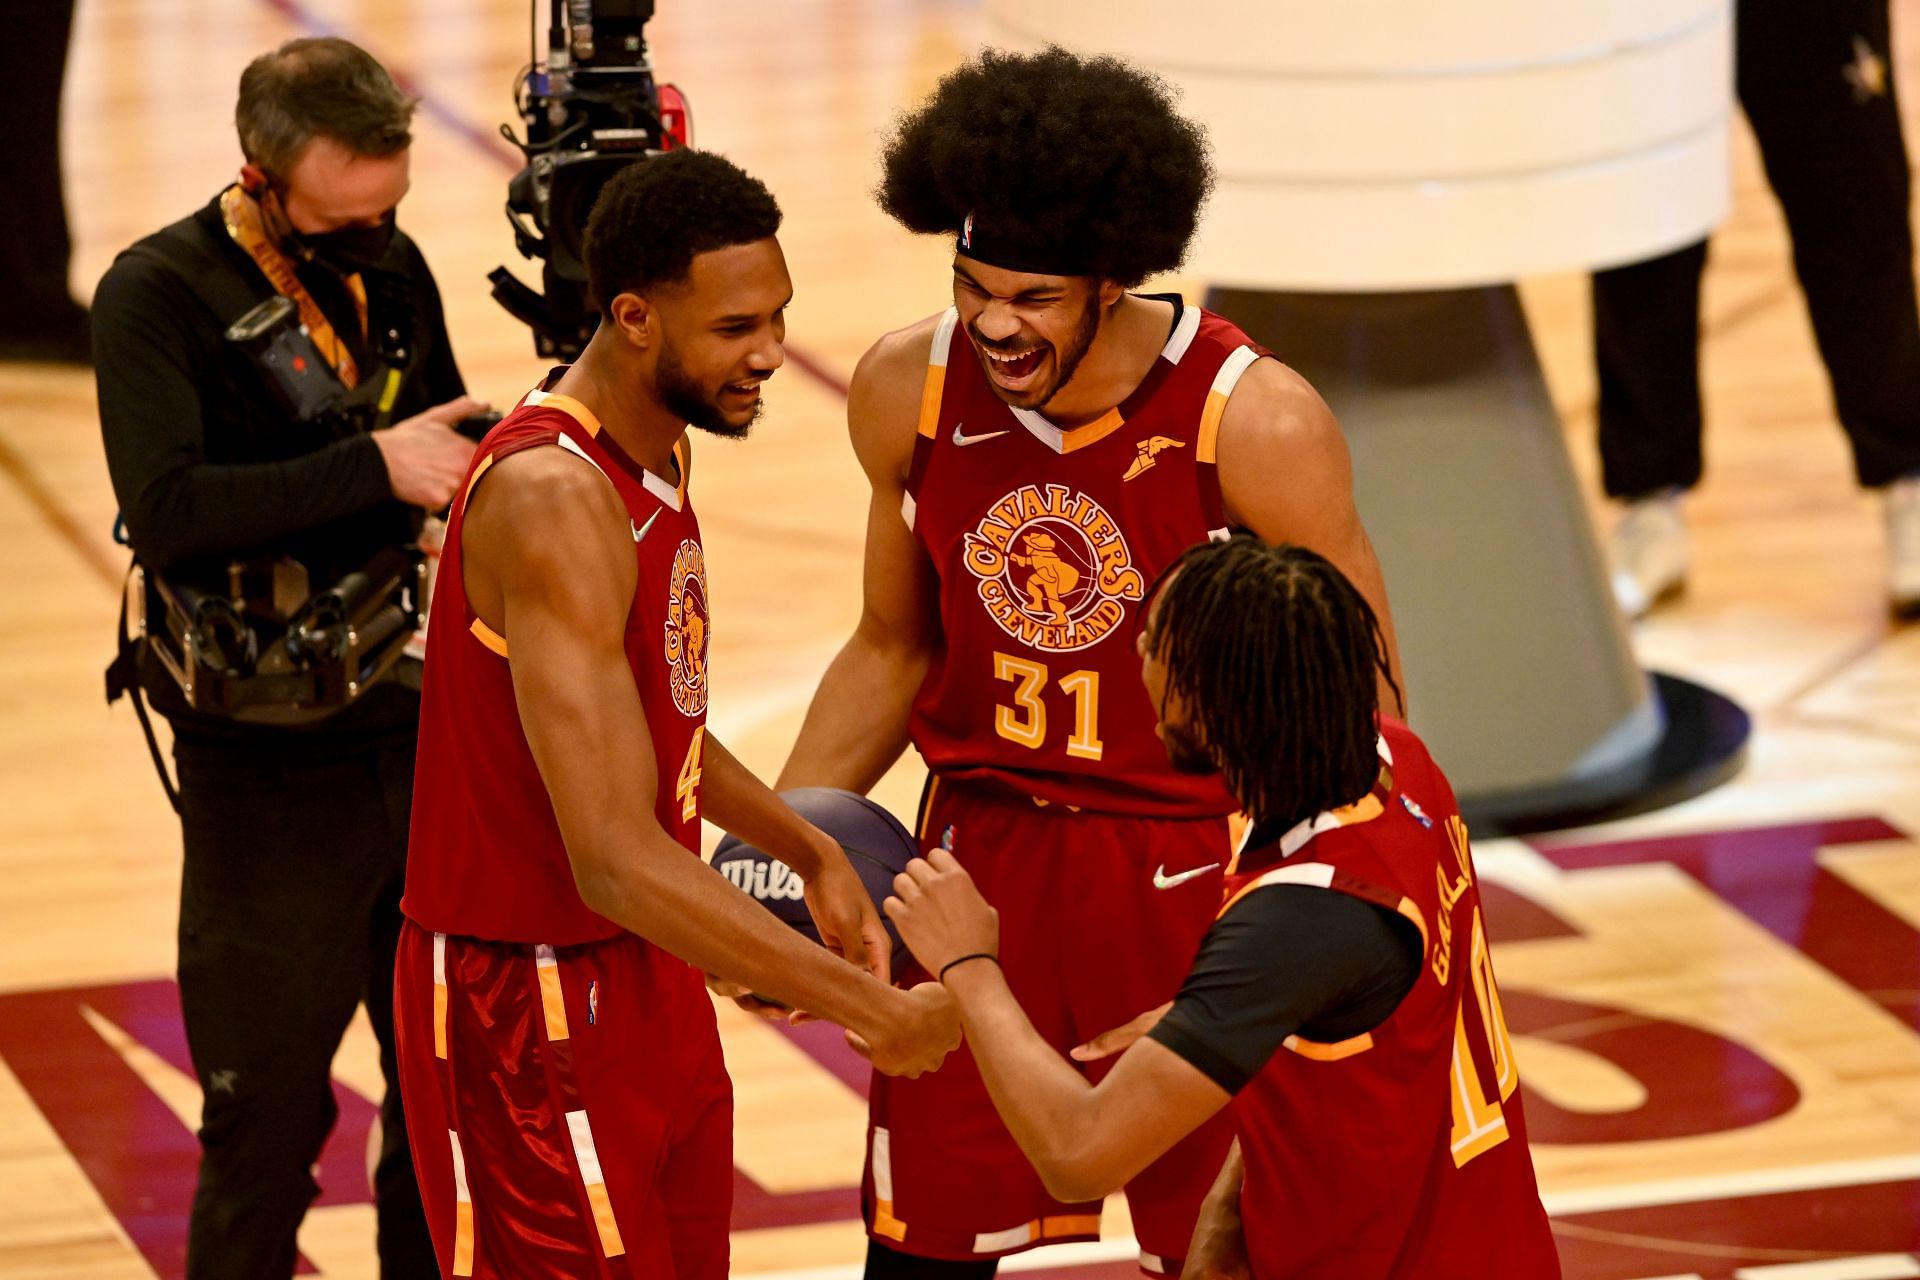 Evan Mobley #4, Darius Garland #10 and Jarrett Allen #31 of Team Cavs react after winning the Taco Bell Skills Challenge as part of the 2022 All-Star Weekend at Rocket Mortgage Fieldhouse on February 19, 2022 in Cleveland, Ohio.